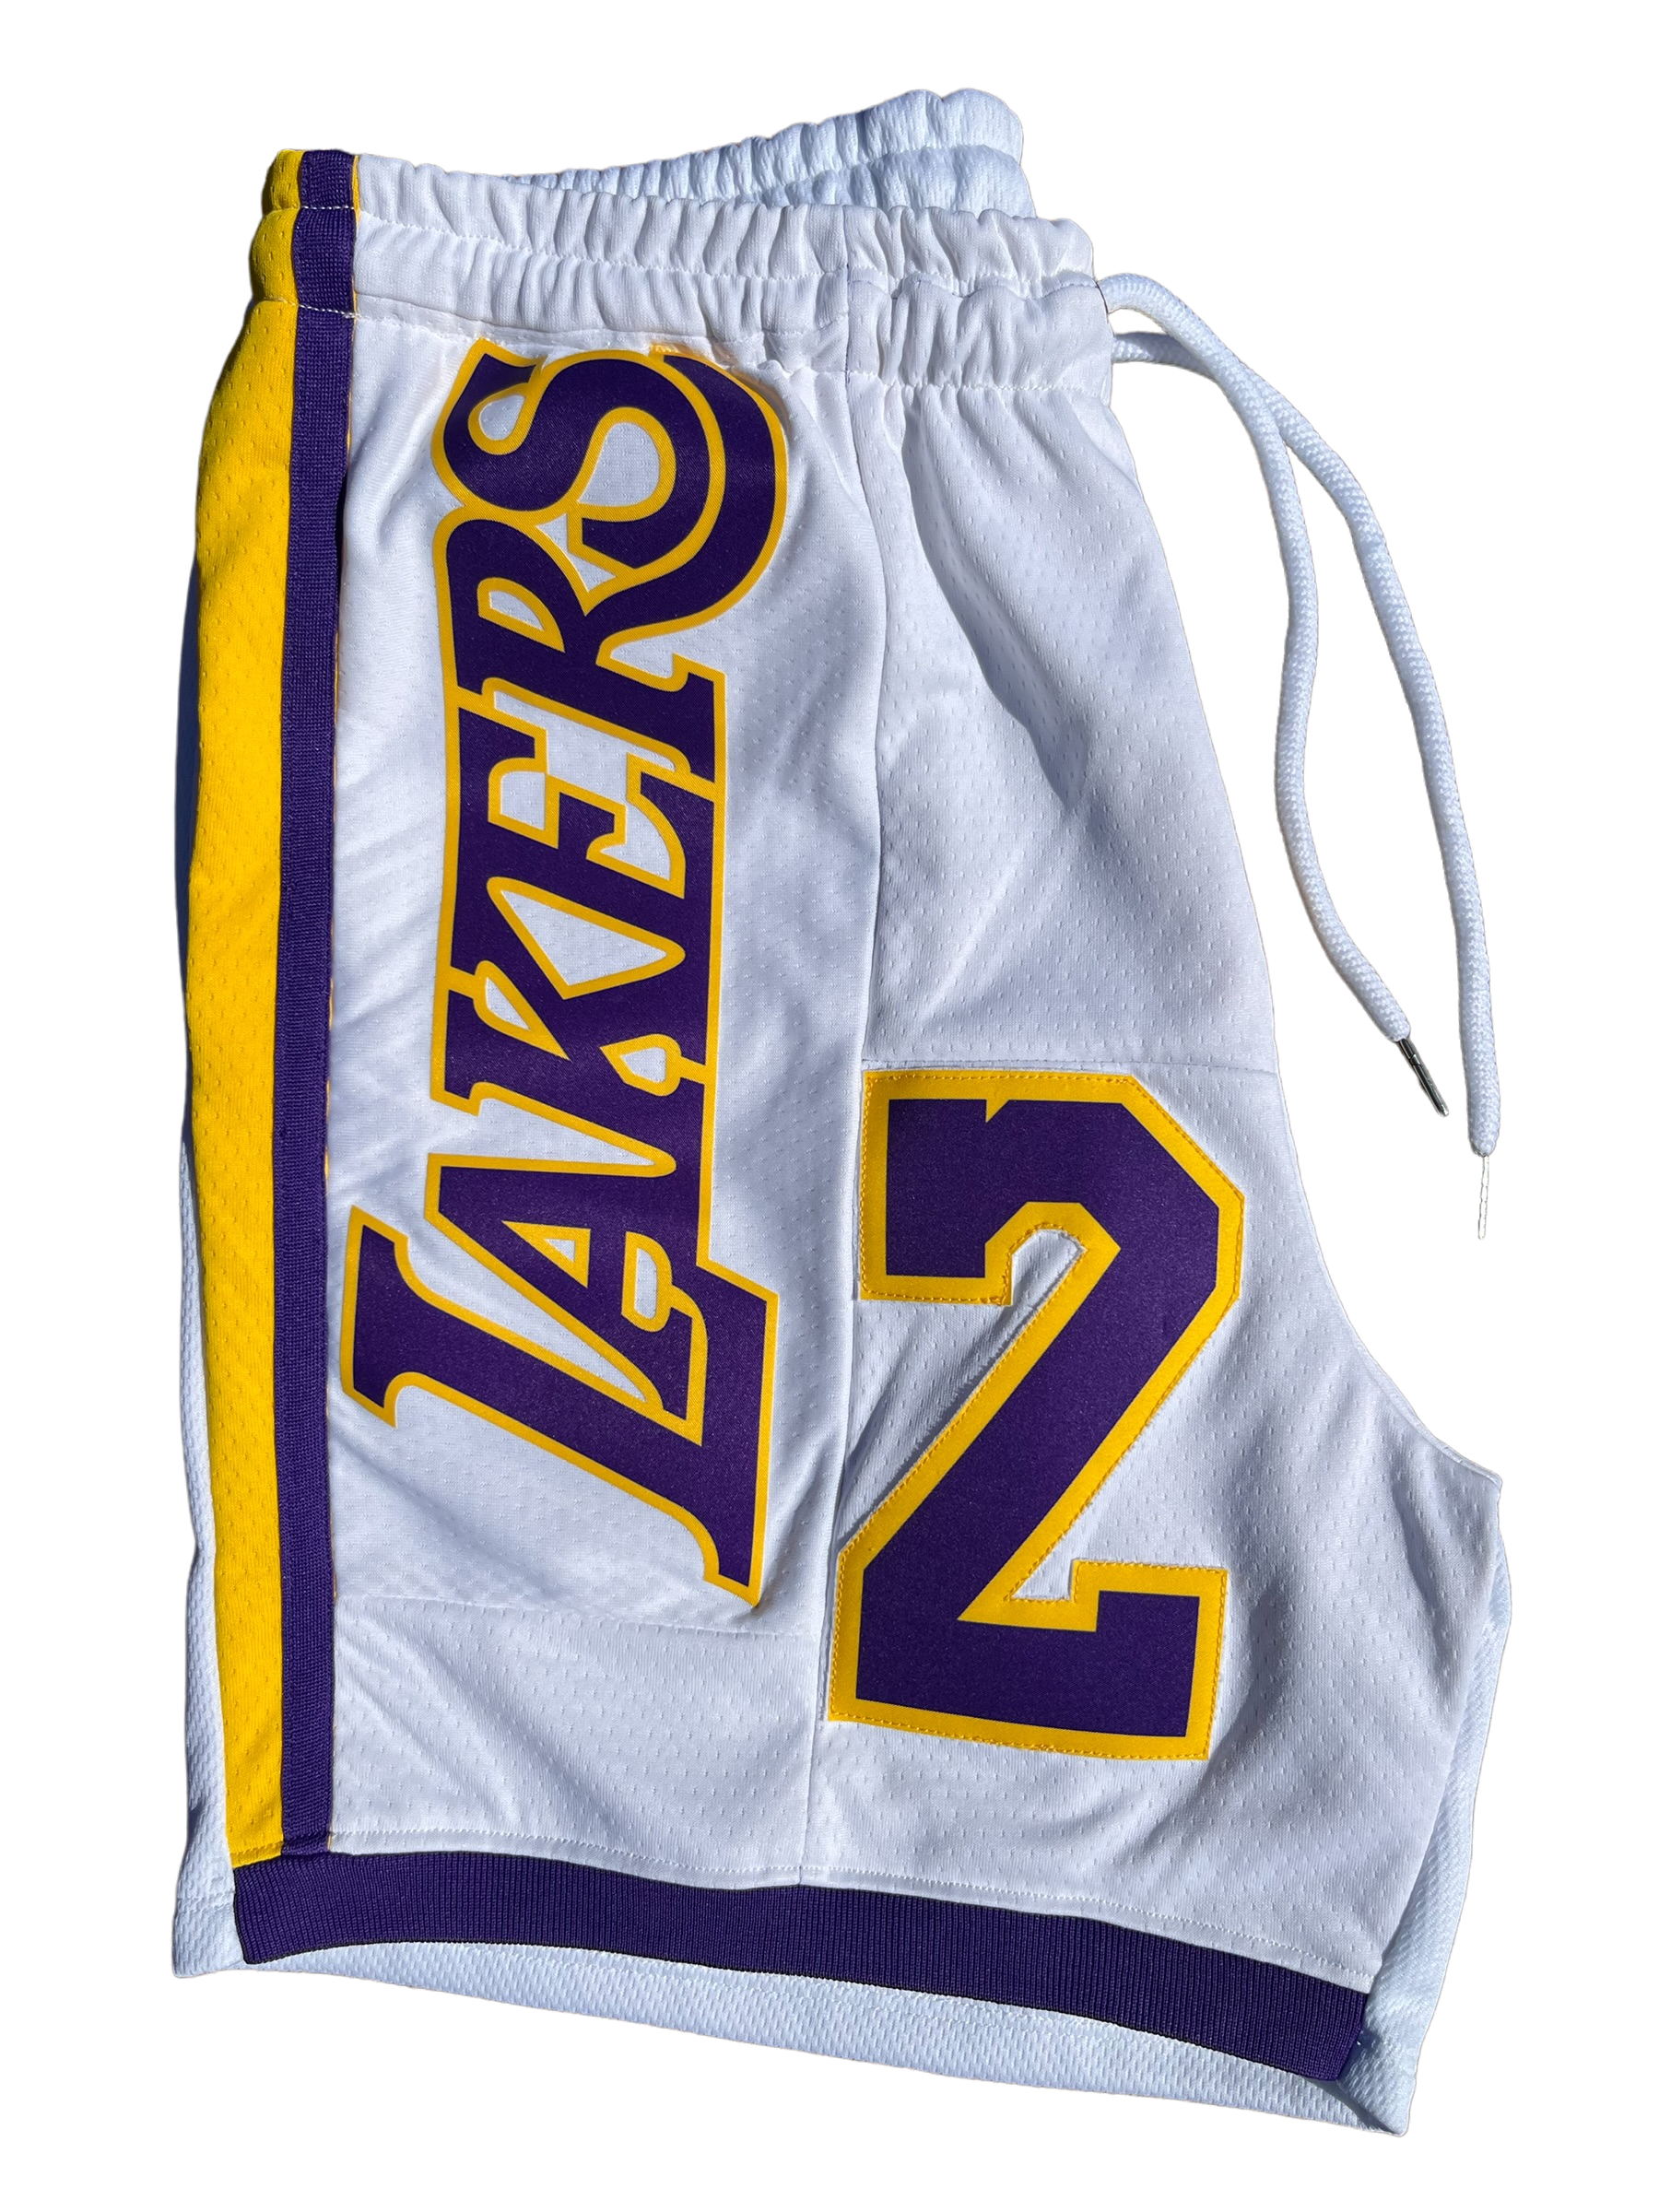 Reworked Los Lakers jersey shorts – the Label